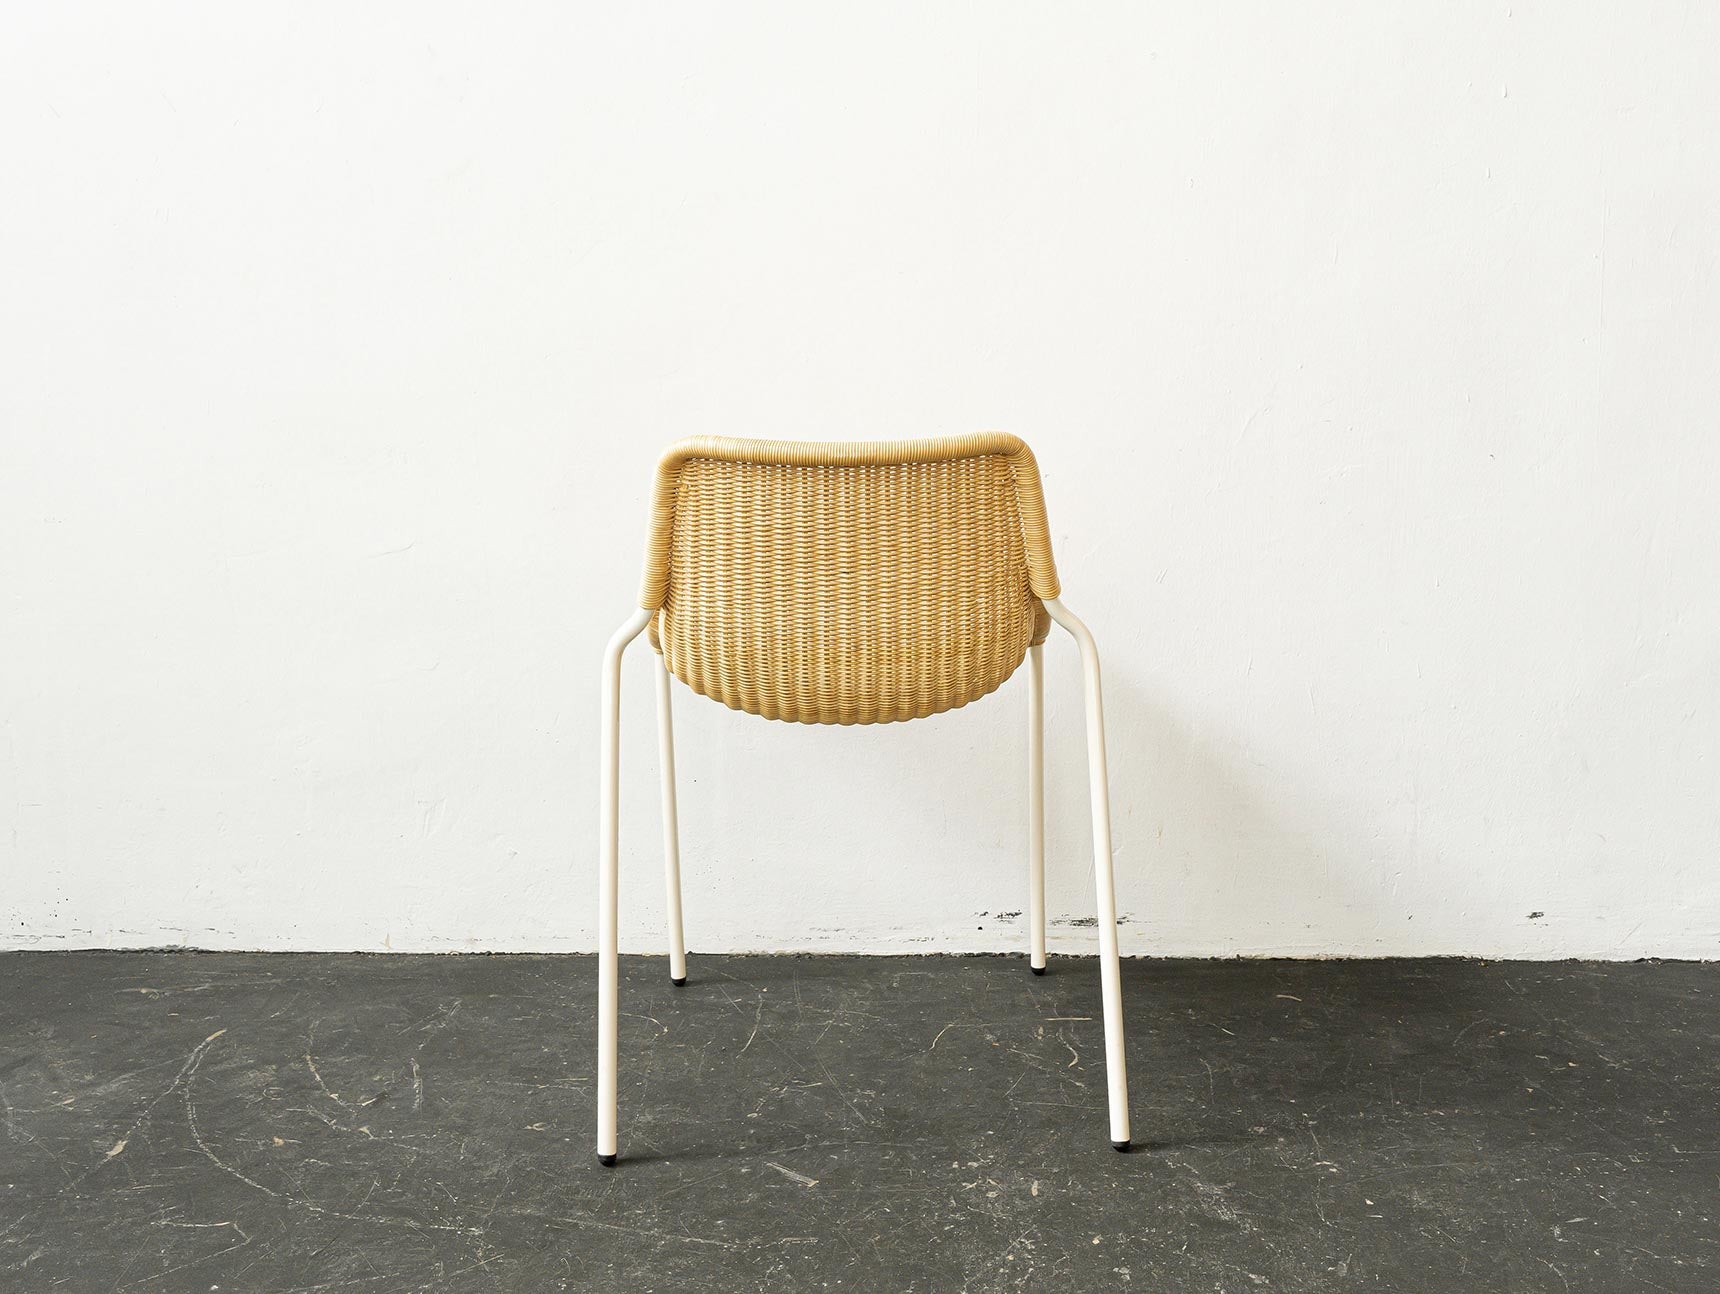 Vintage Rattan Dining Chair